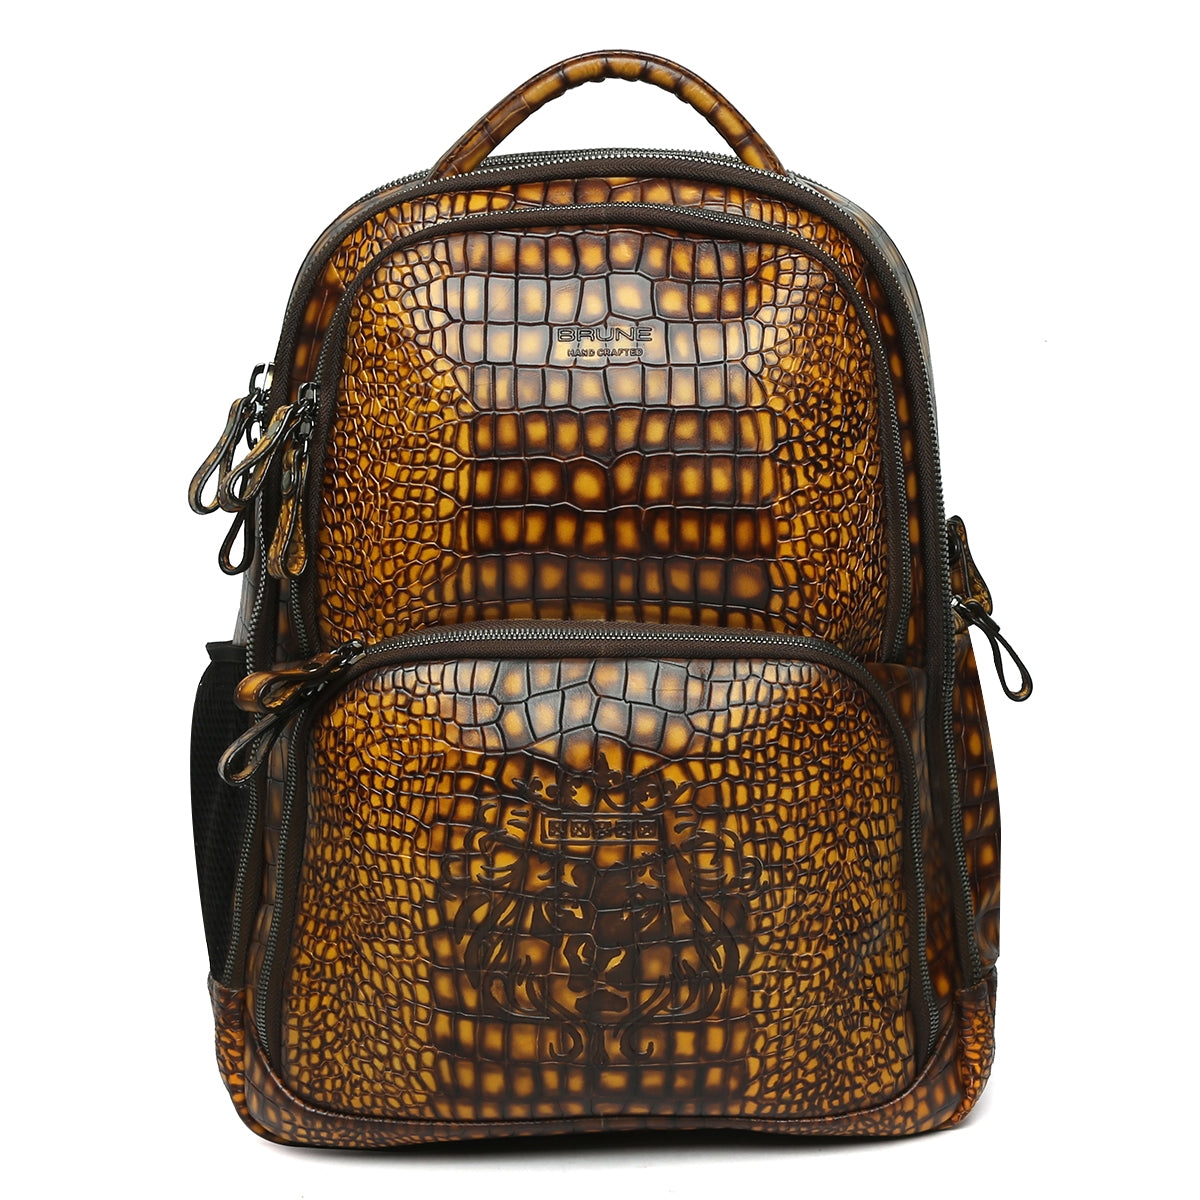 Hand Painted Leather Backpack With Smokey Finish Yellow Croco Textured